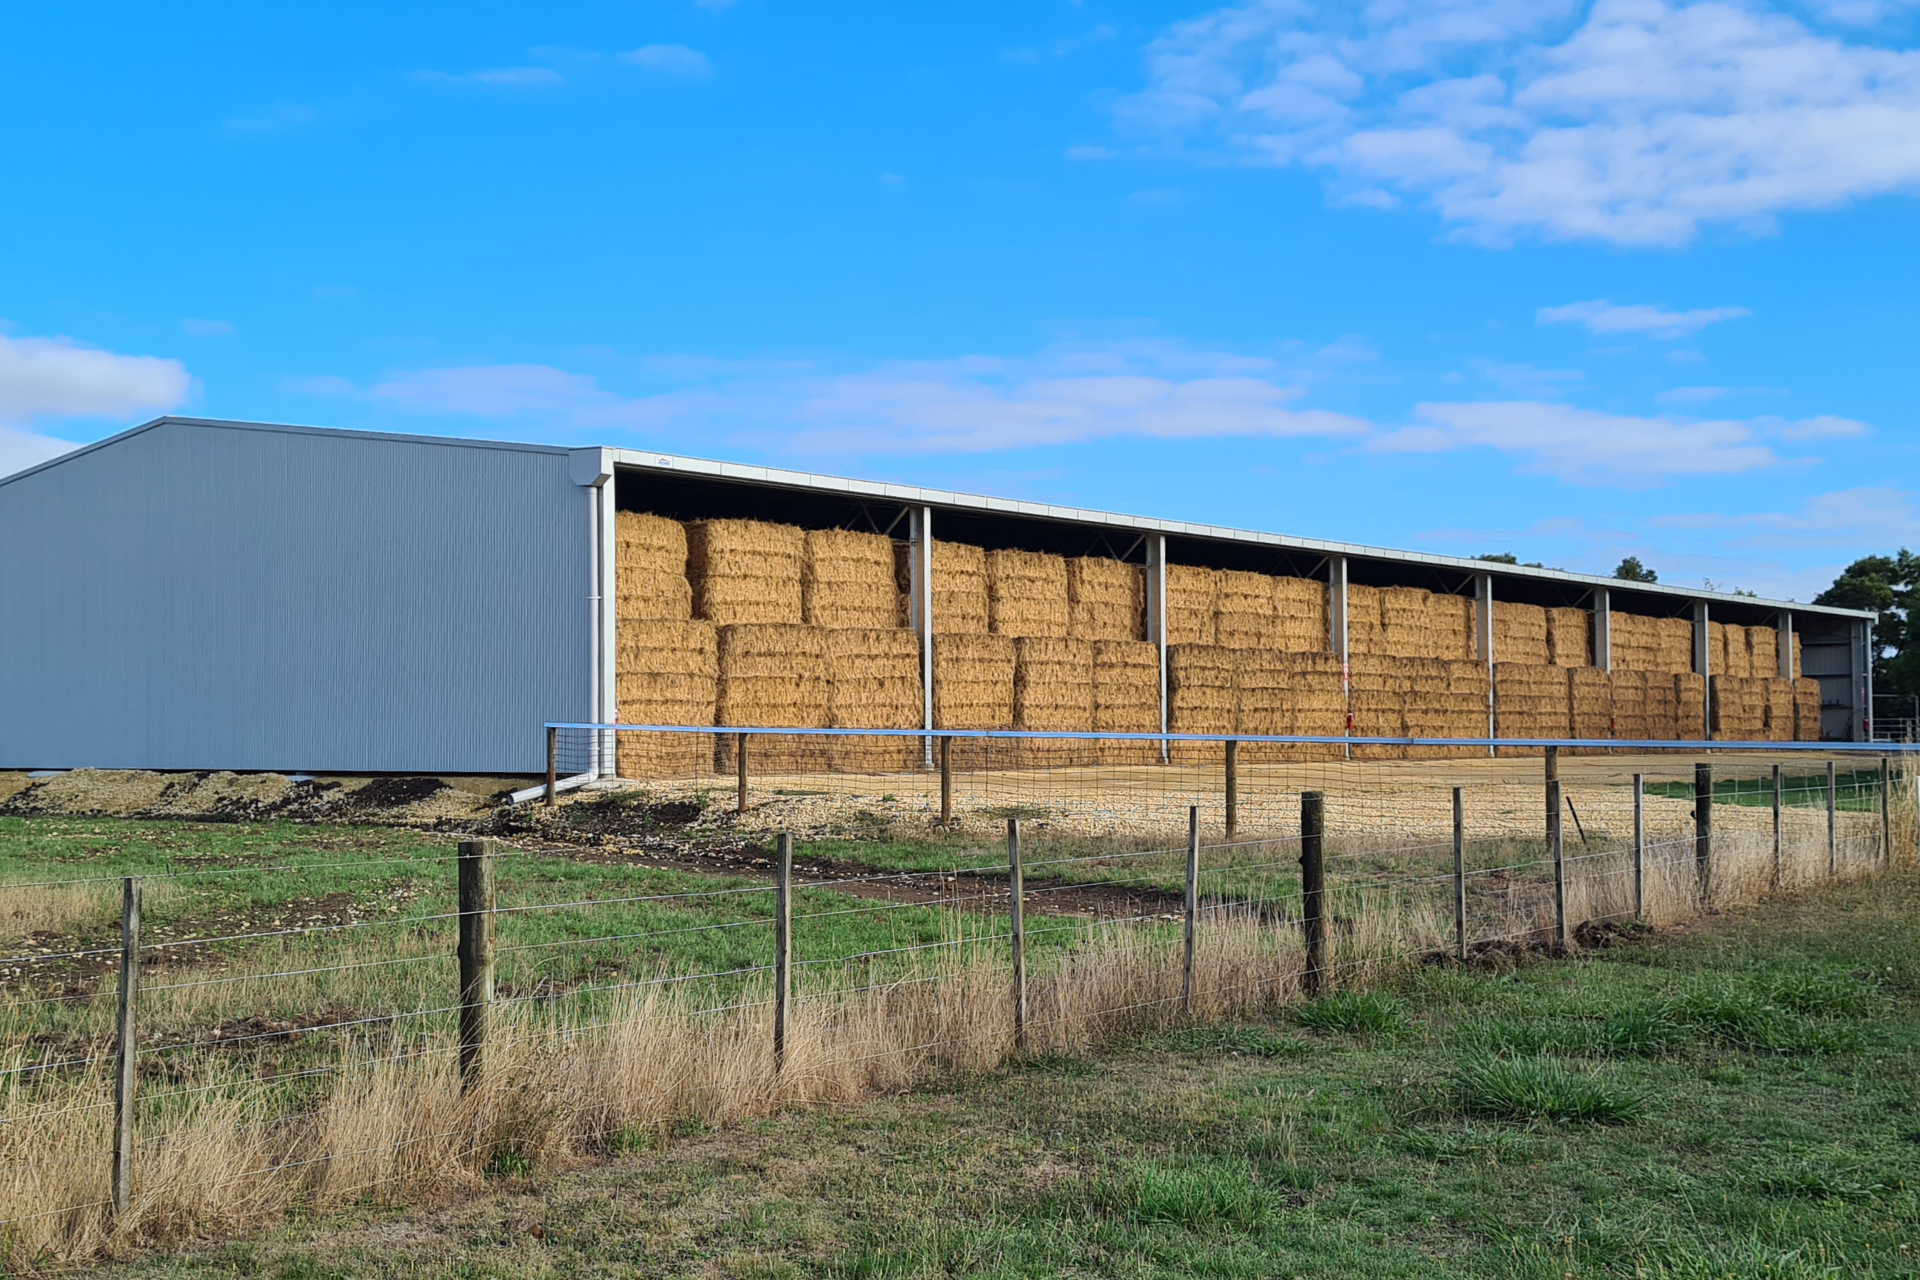 You are currently viewing 64m x 24m x 5m hay shed